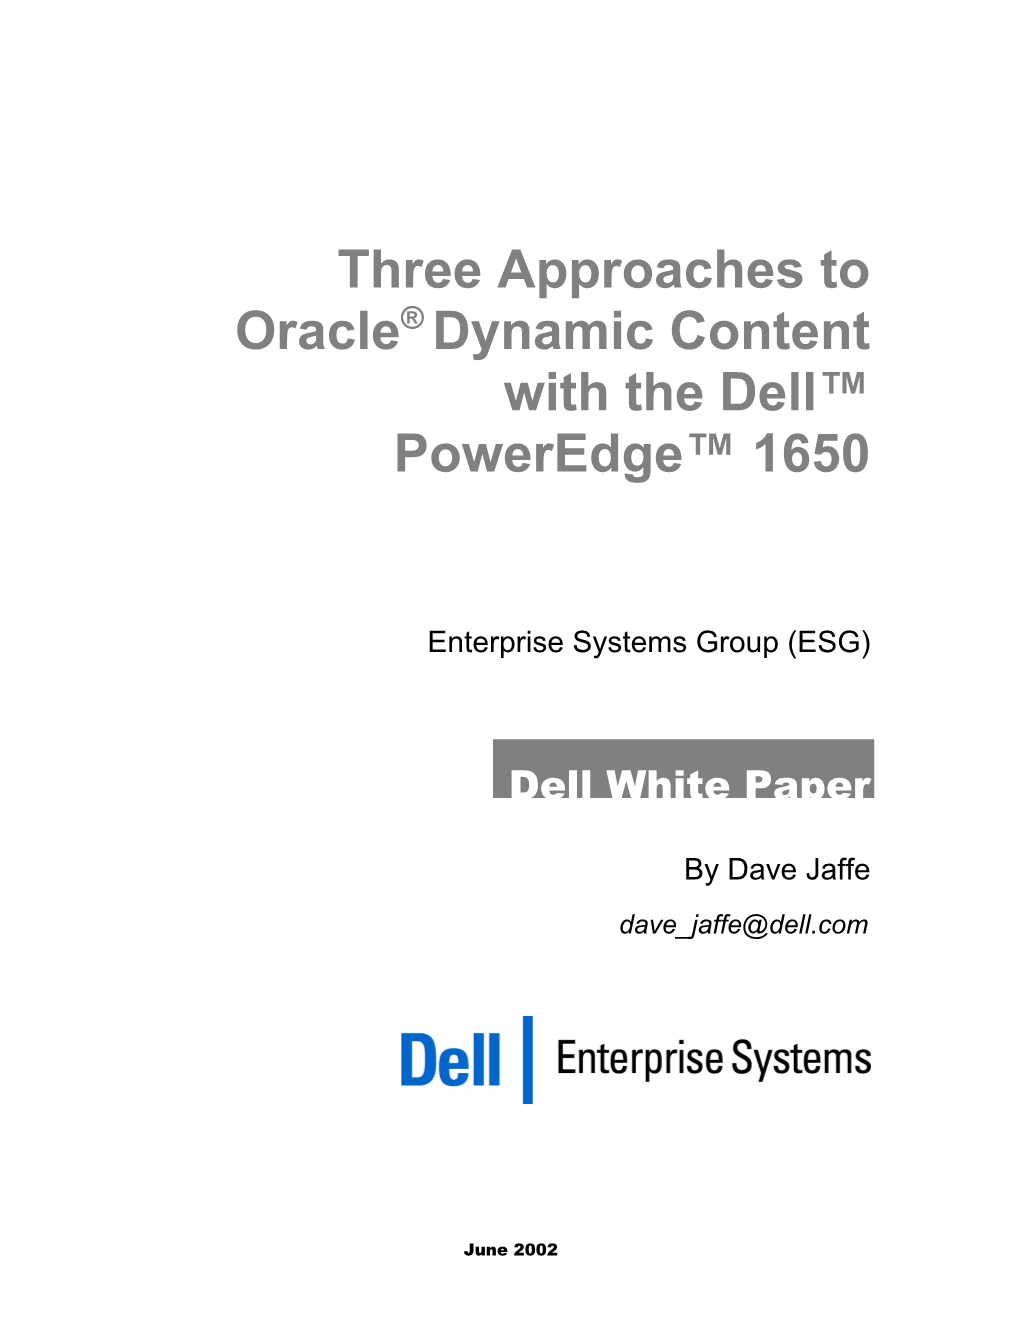 Three Approaches to Oracle Dynamic Content with the Dell Poweredge 1650